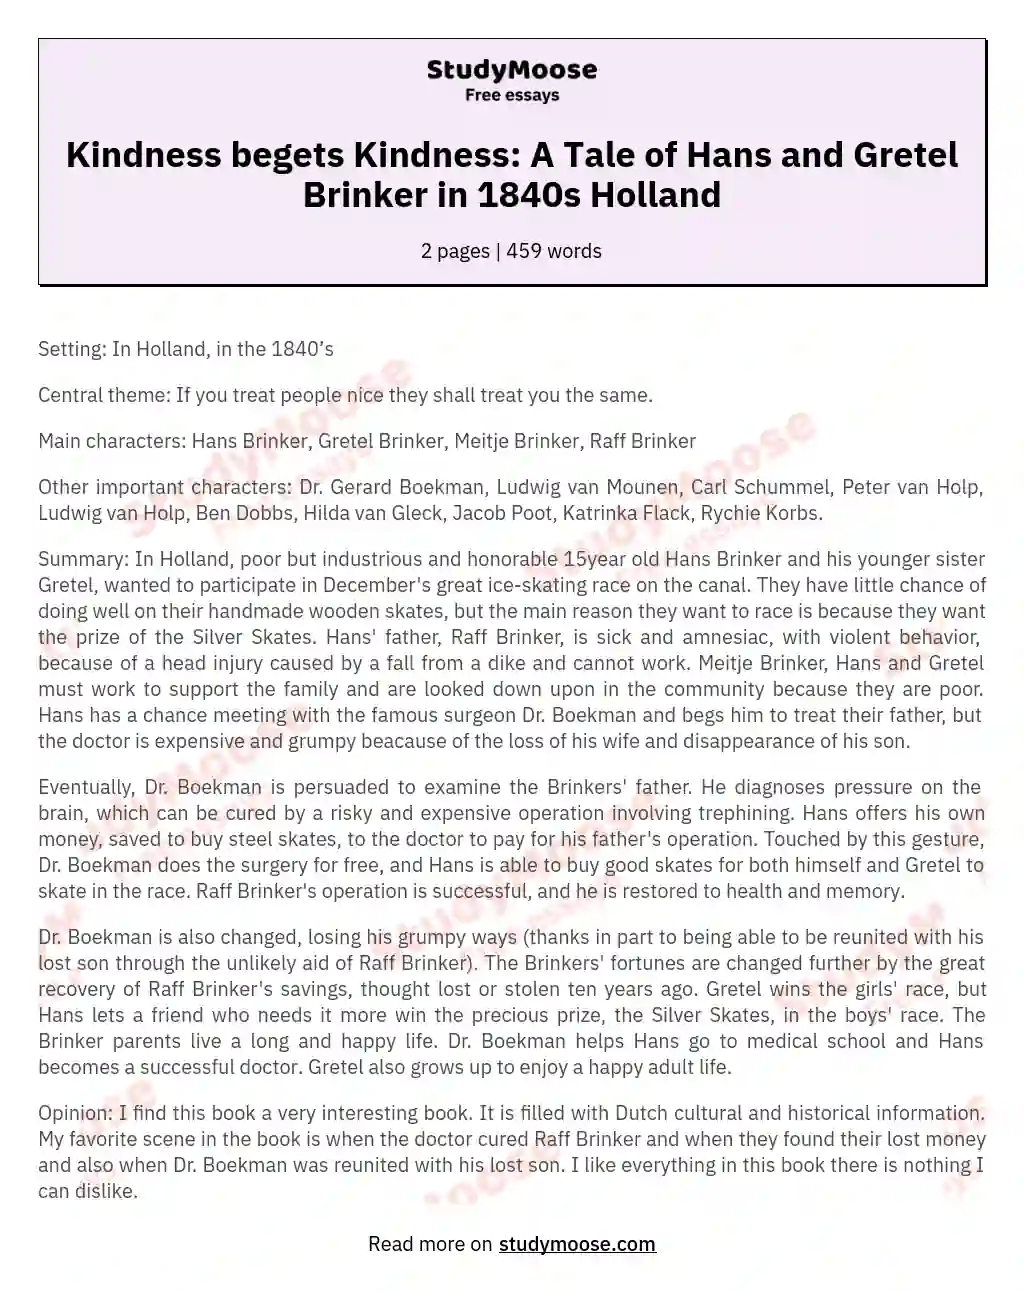 Kindness begets Kindness: A Tale of Hans and Gretel Brinker in 1840s Holland essay